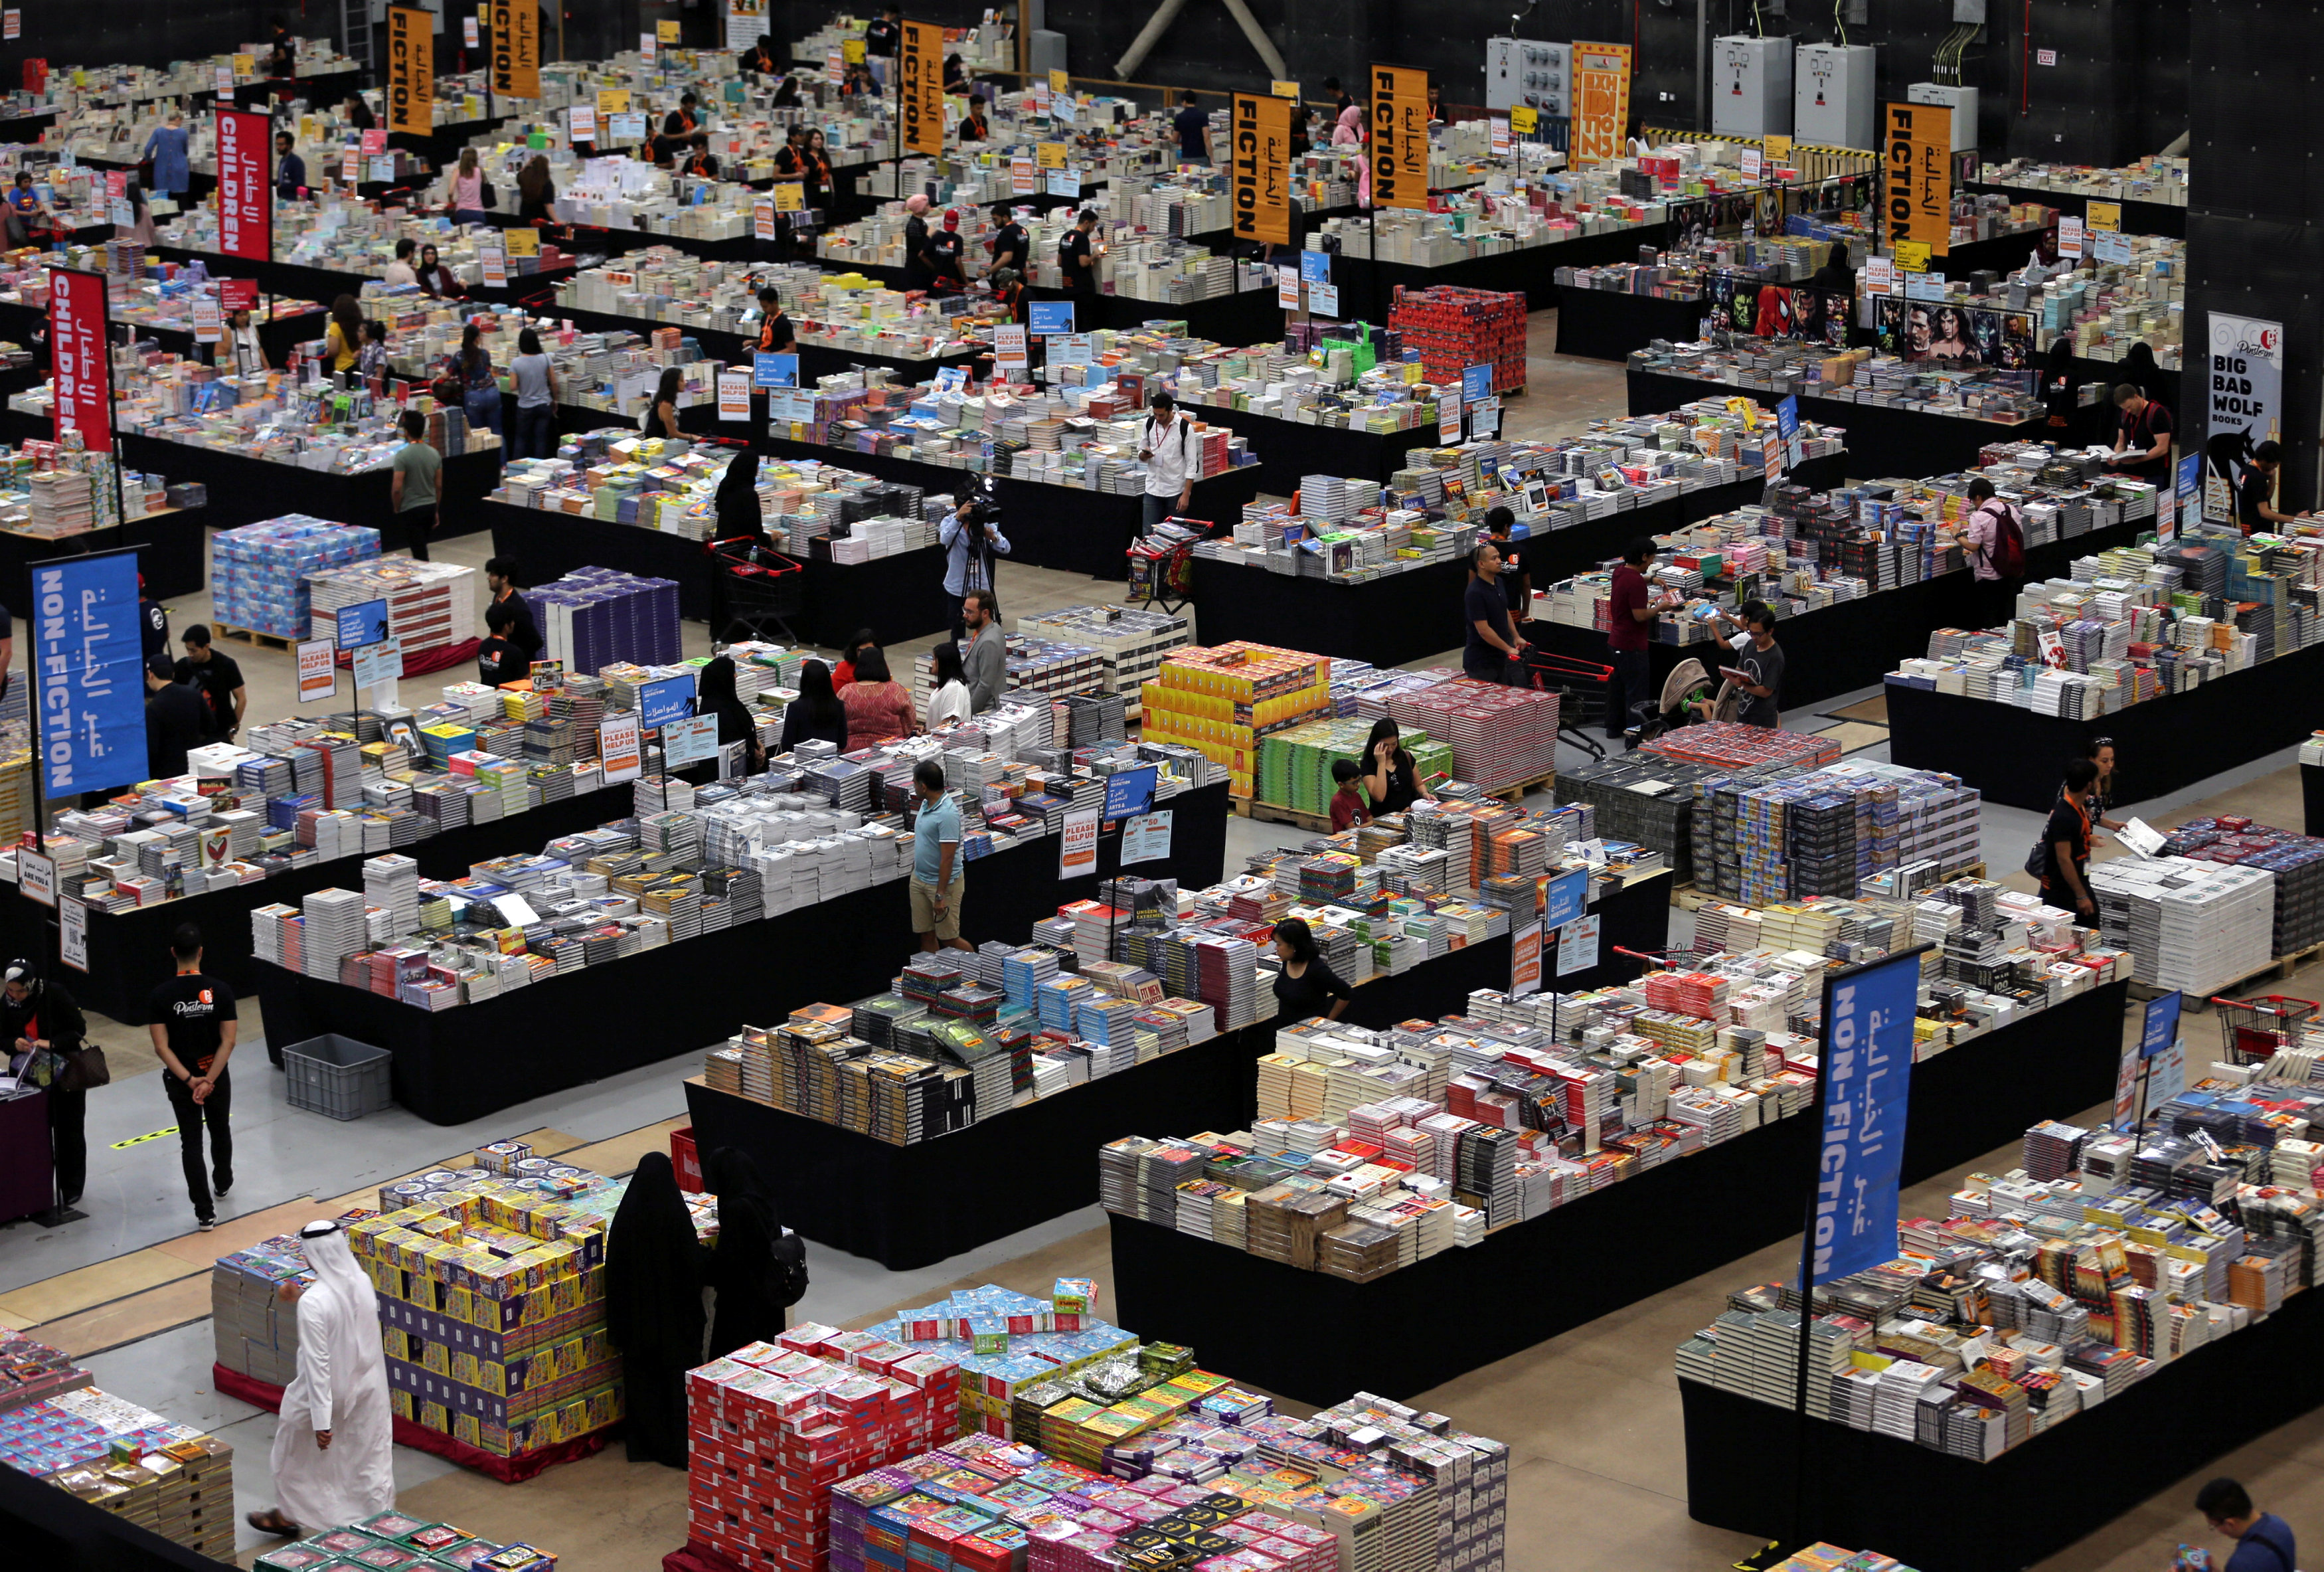 The Big Bad Wolf Book Sale, which calls itself the world's biggest, opens its doors to visitors in Dubai